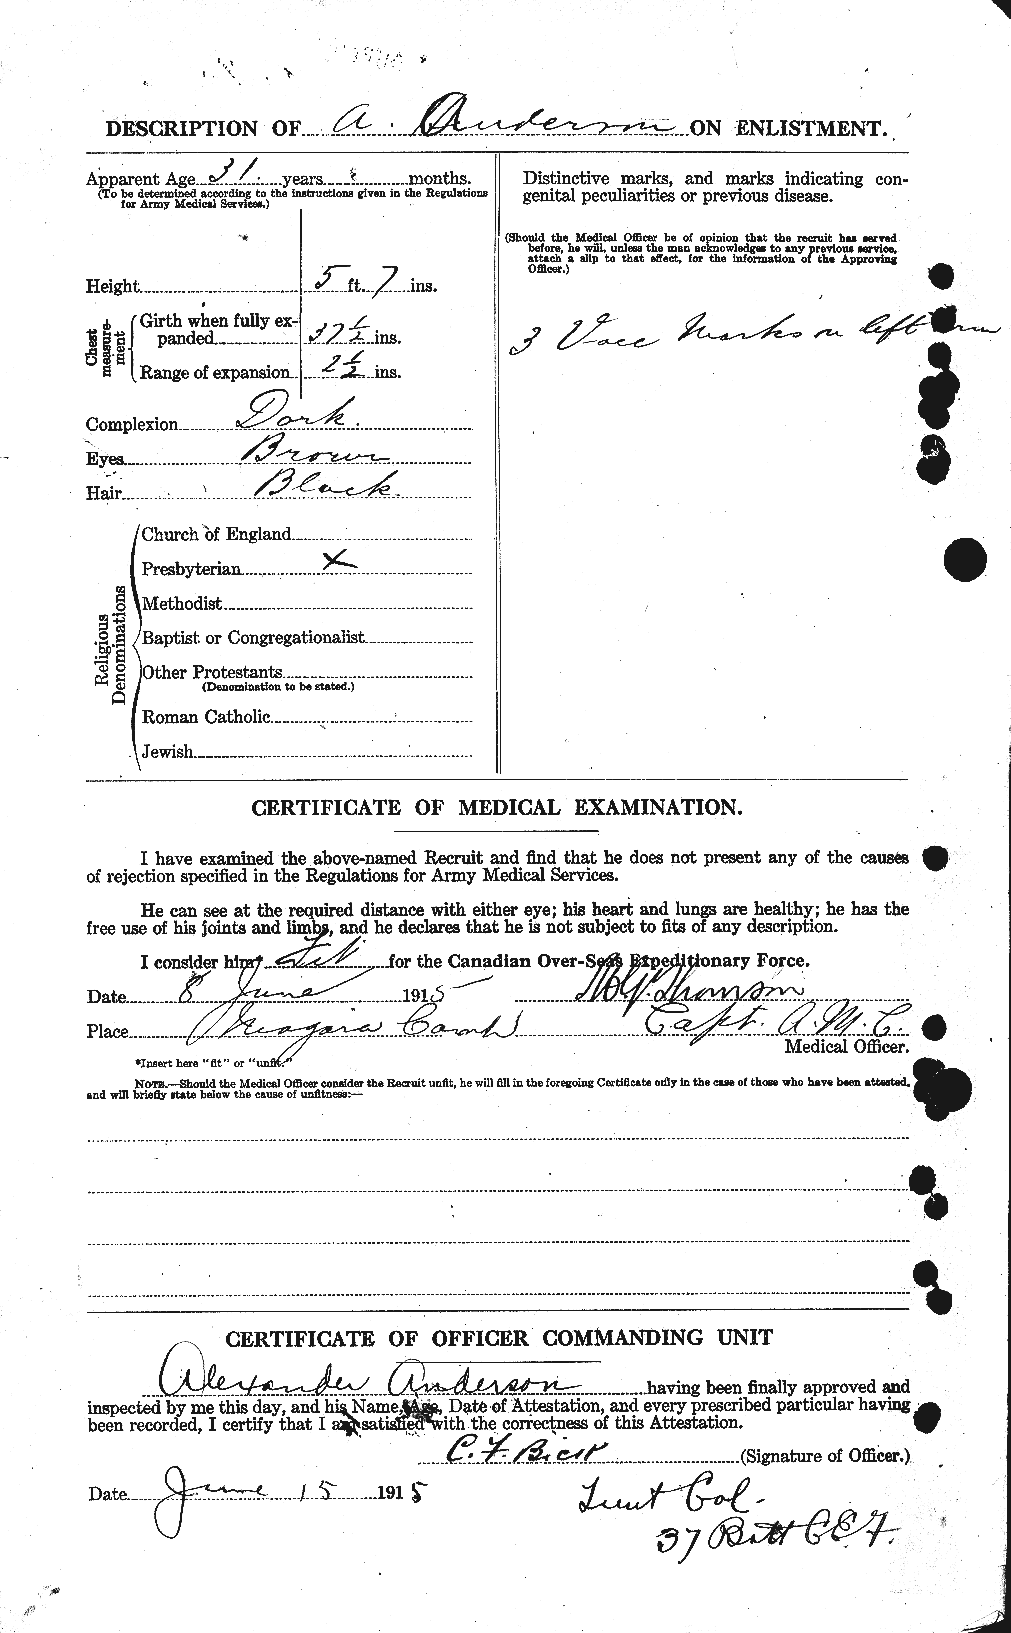 Personnel Records of the First World War - CEF 209514b